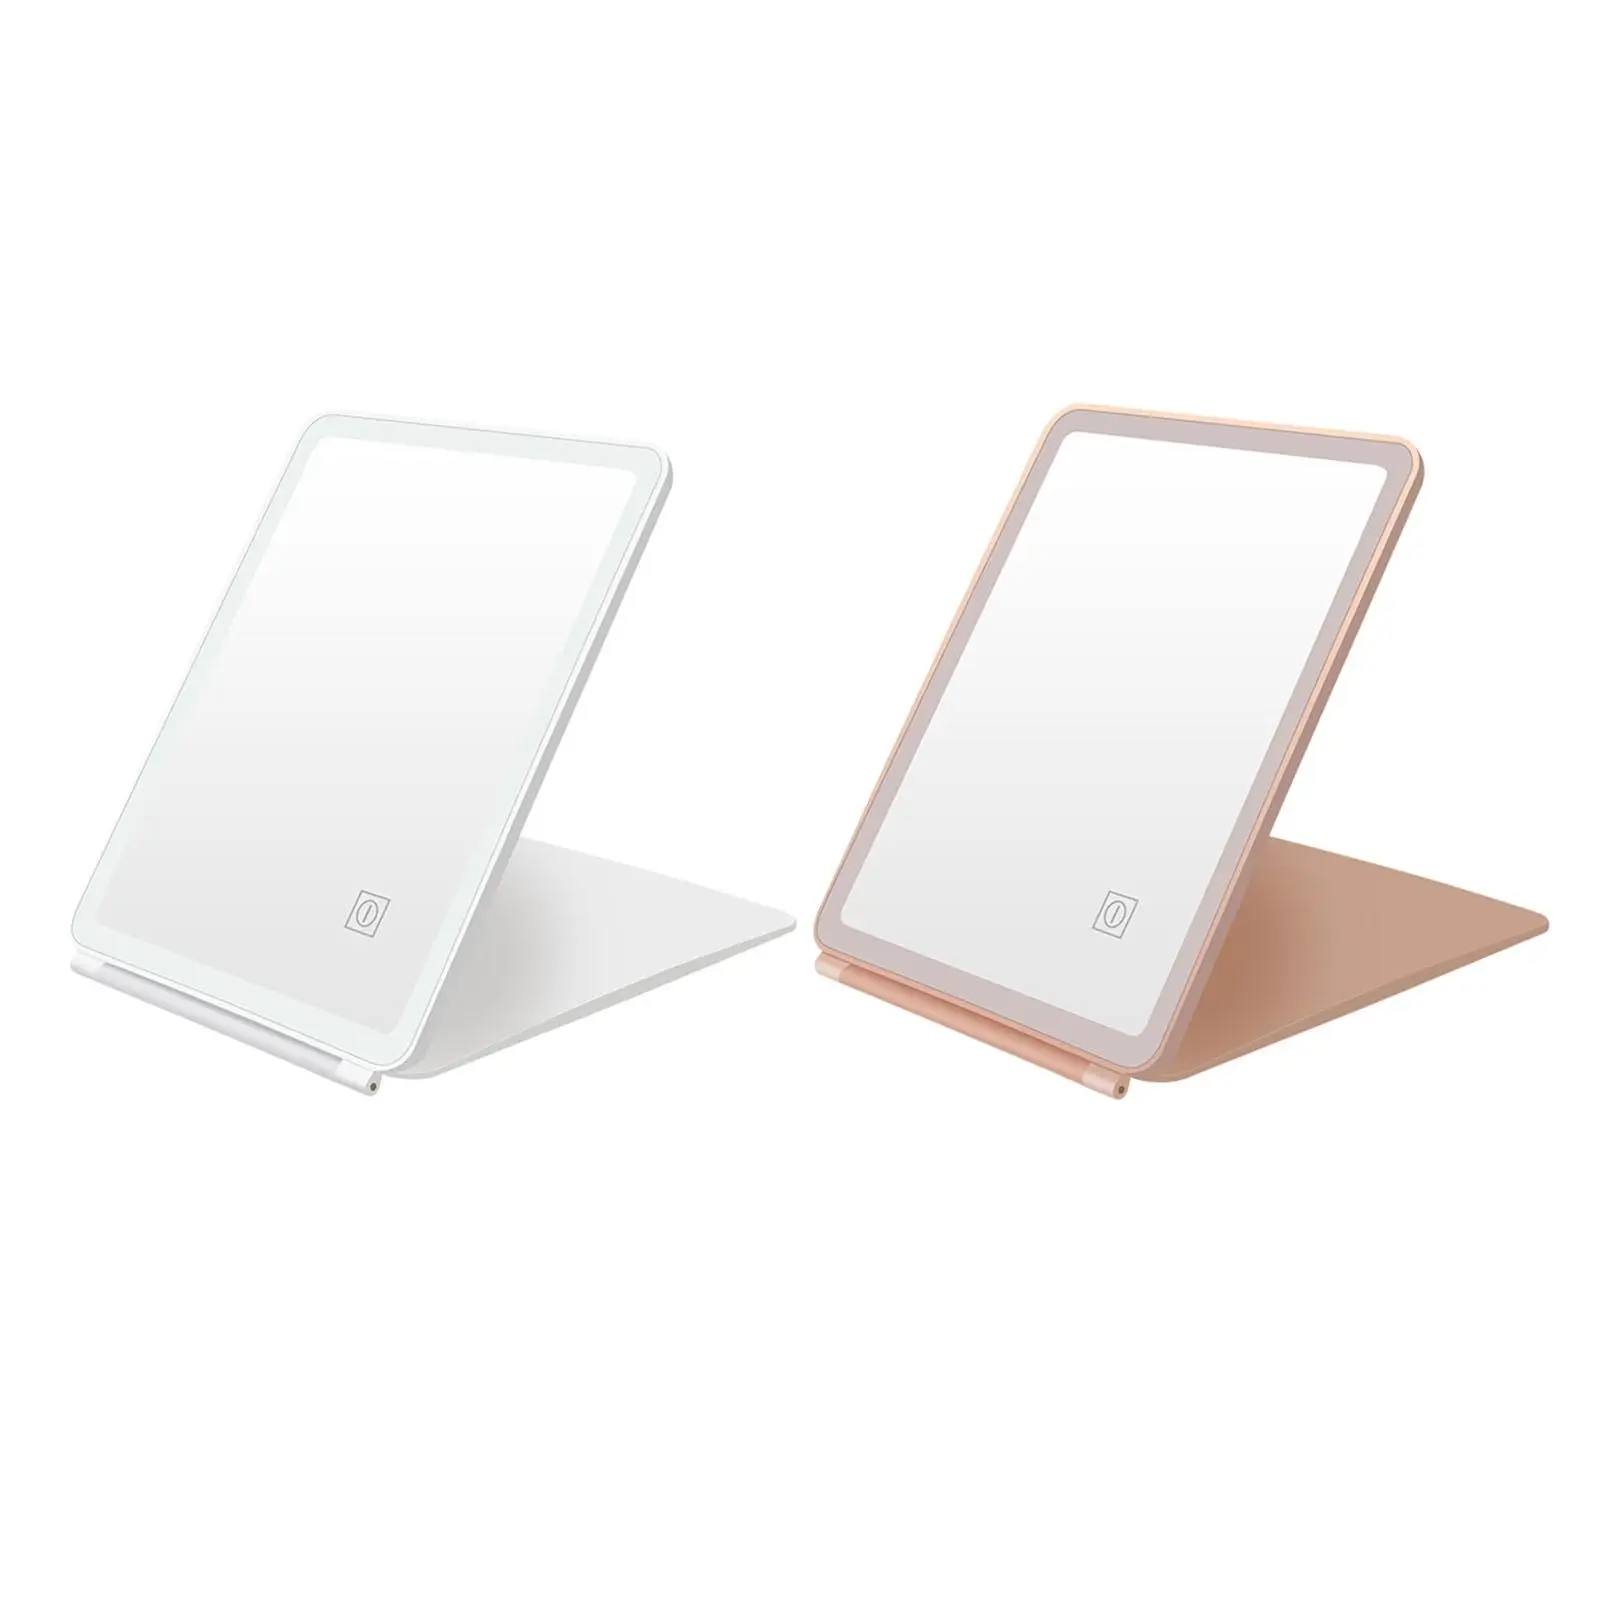 Flip LED Vanity Mirror Portable Touch Switch Dimmable for Makeup Home Beauty